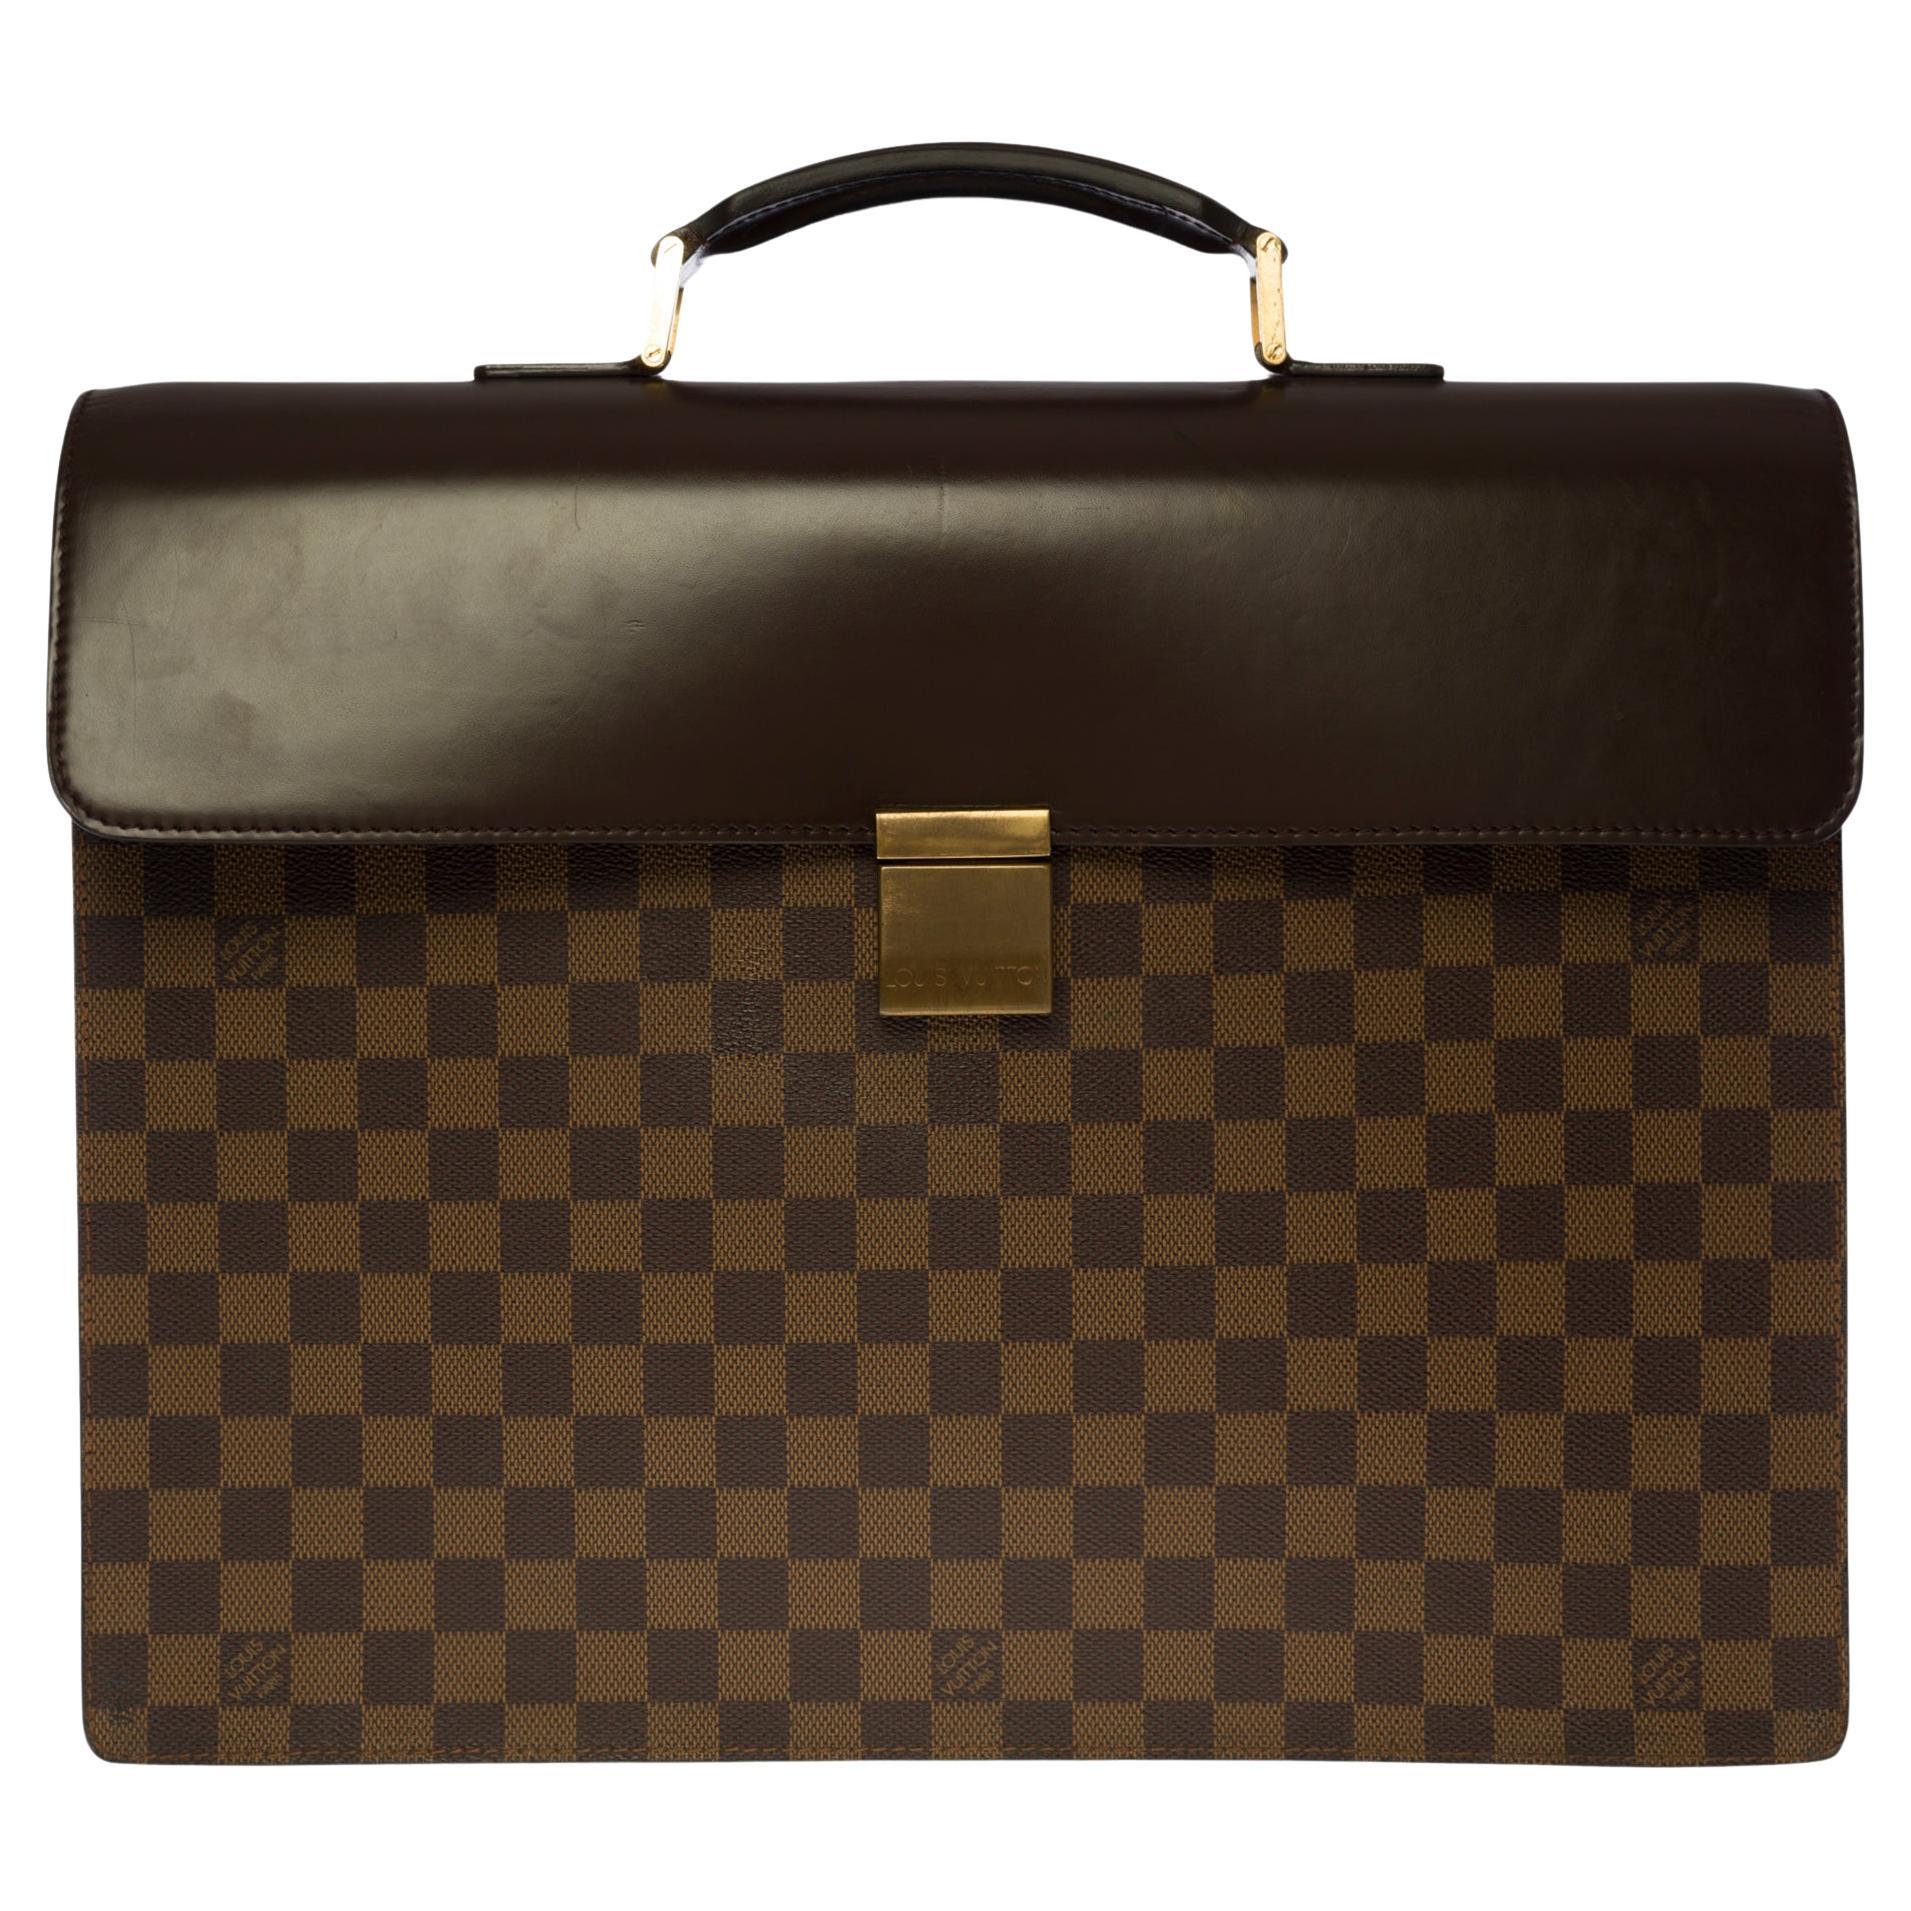 Louis Vuitton Altona Briefcase in brown checkerboard canvas and brown leather